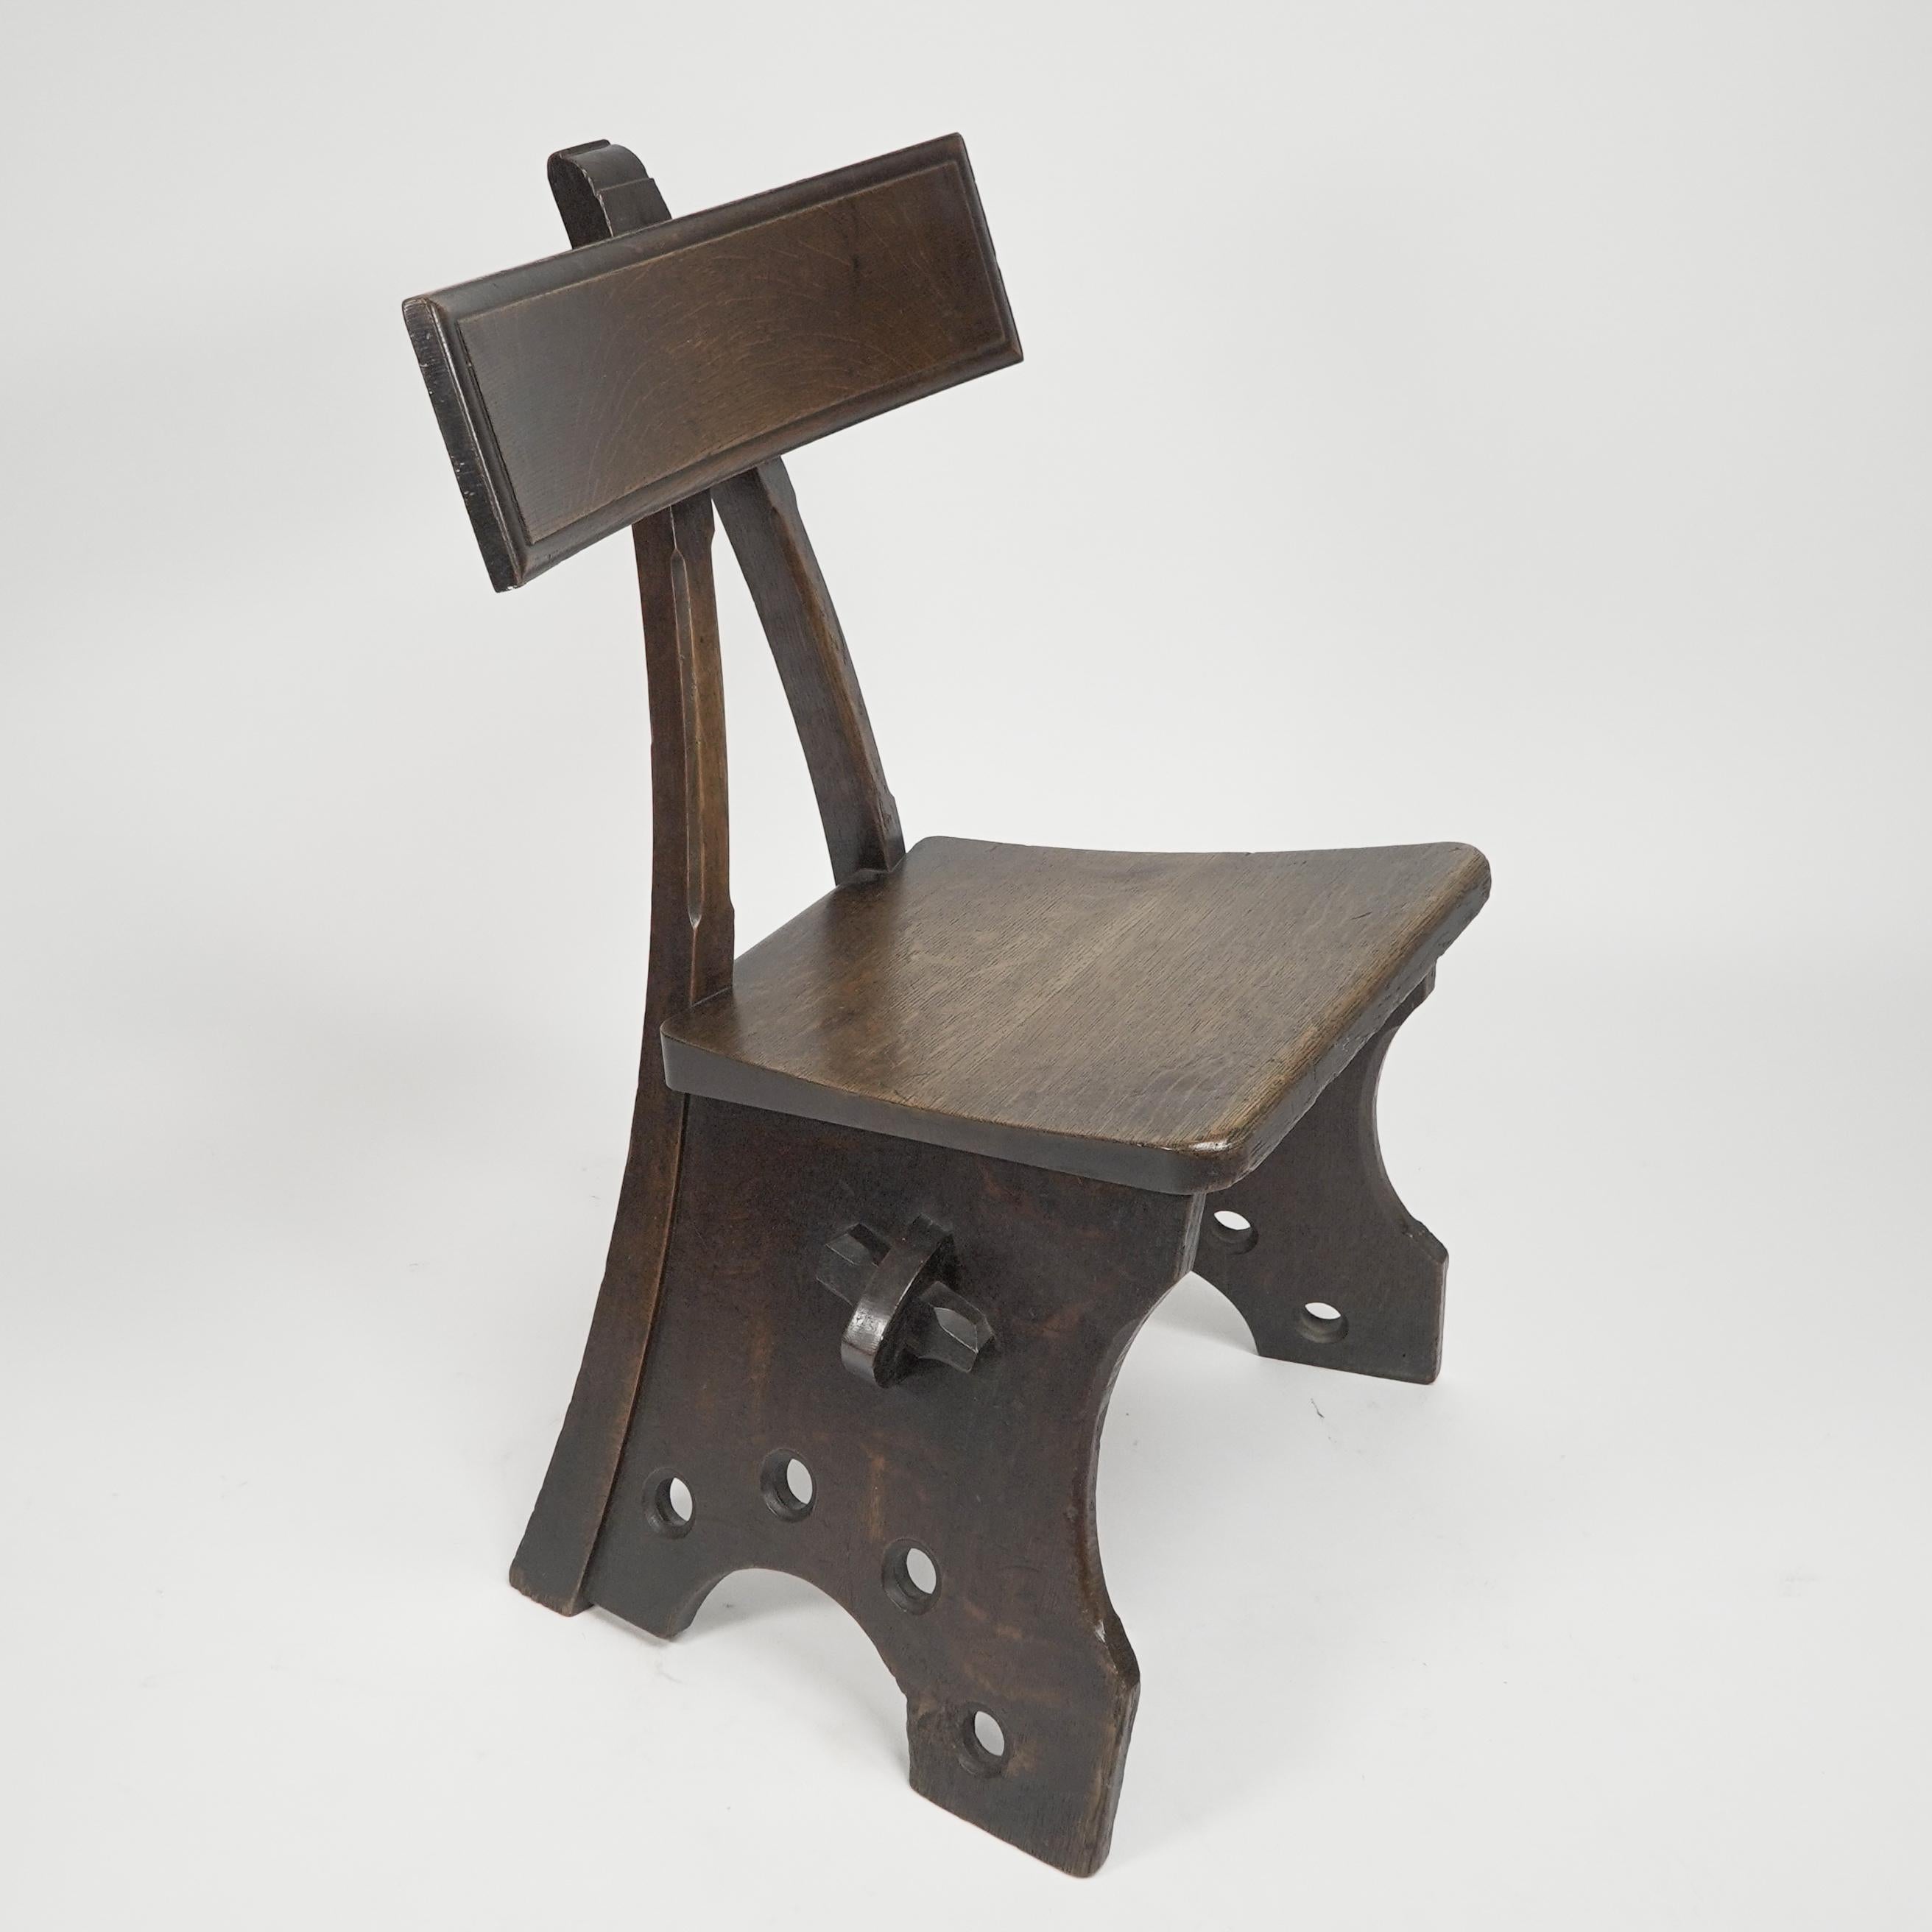 E. Welby Pugin. A Gothic Revival oak chair design can be found in the Public Record Office, Kew. (BT/43/58, no. 245877)., and is titled 'front elevation of chair quarter real size'. The chair was part of the interiors E. W. Pugin designed for the